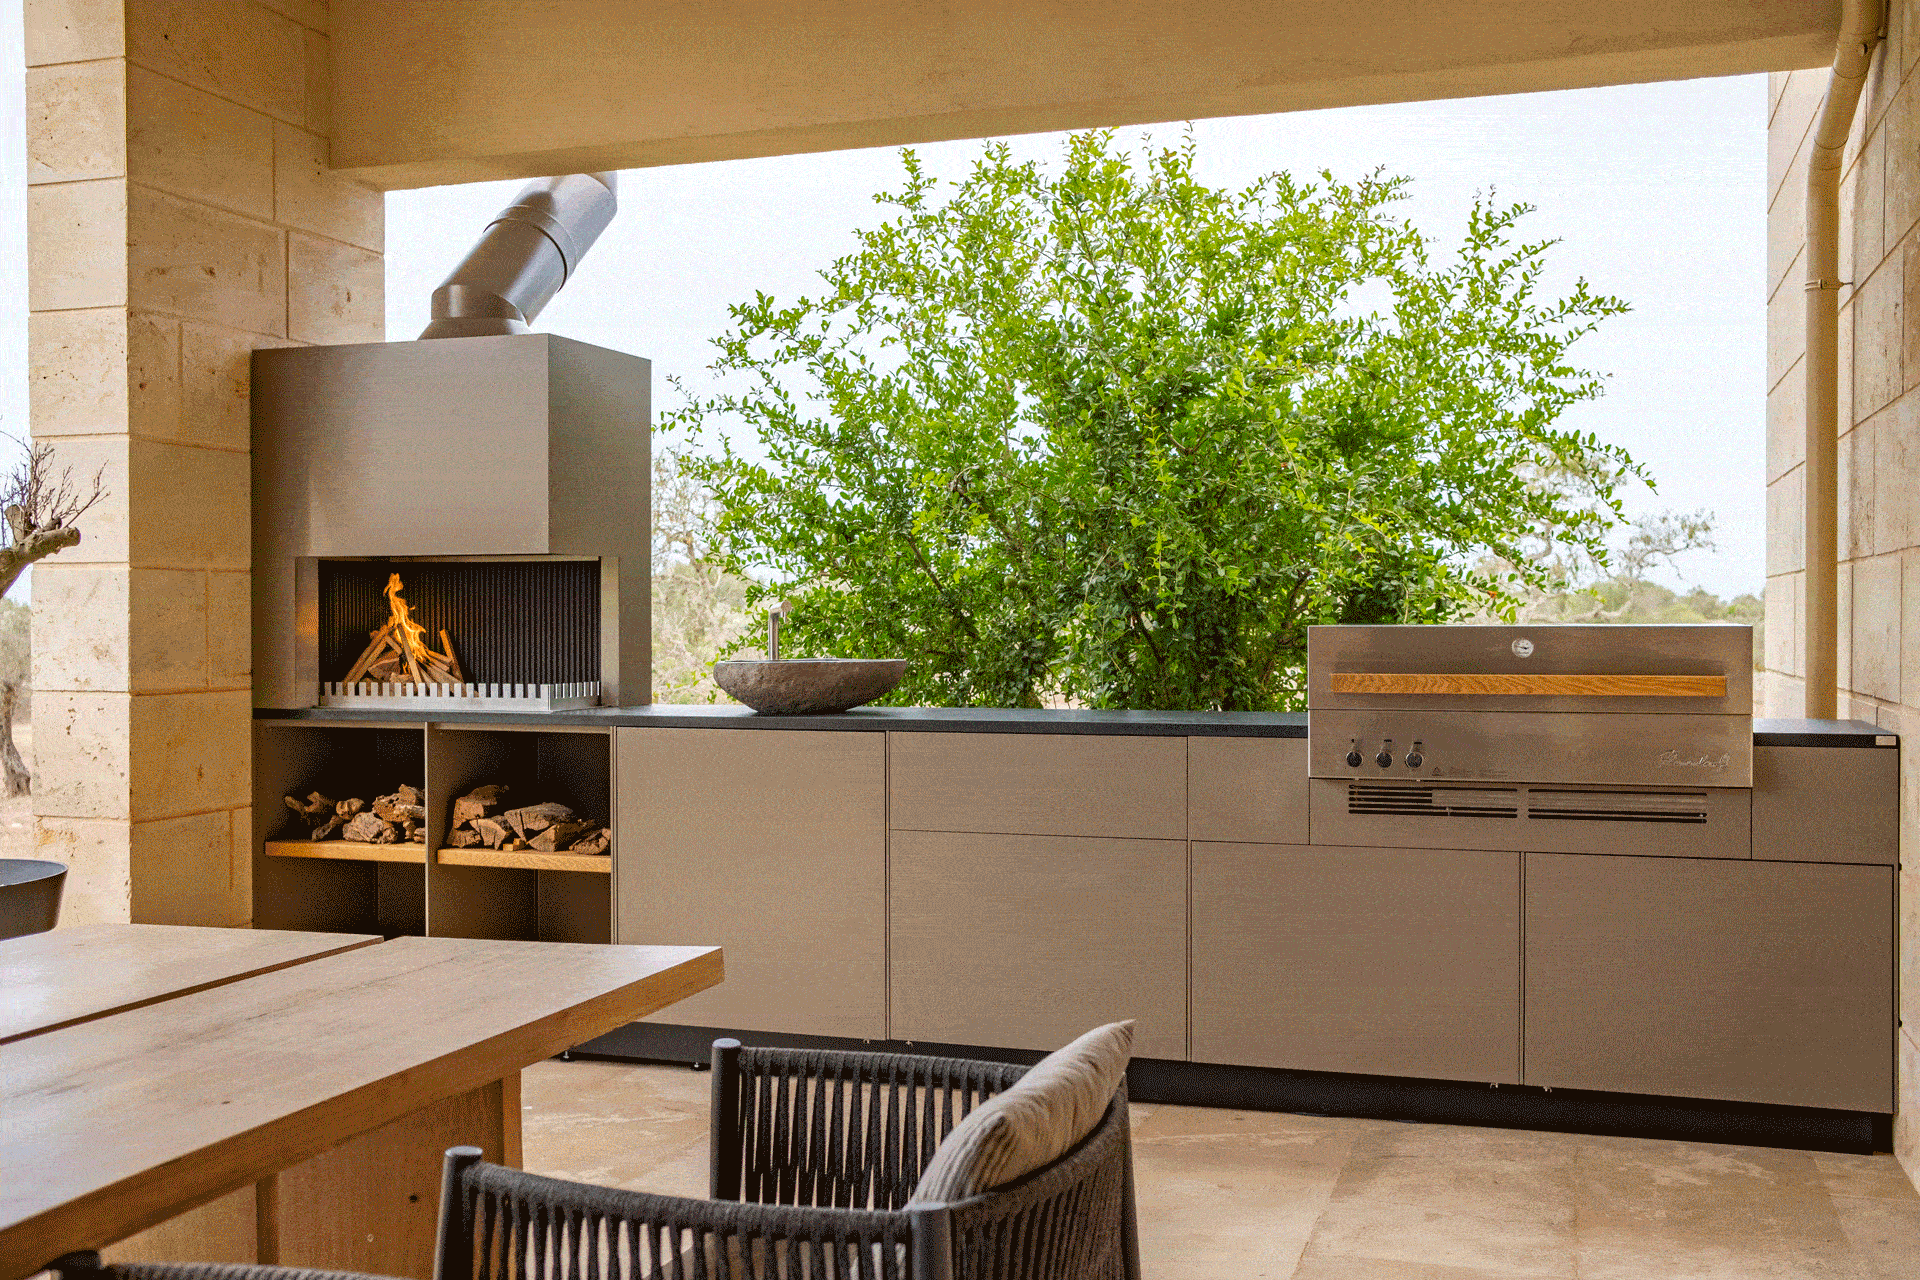 This beautiful outdoor kitchen was built exactly to measure on a finca in Mallorca. The Outdoor-Kitchen was created by hand and is made in Germany.